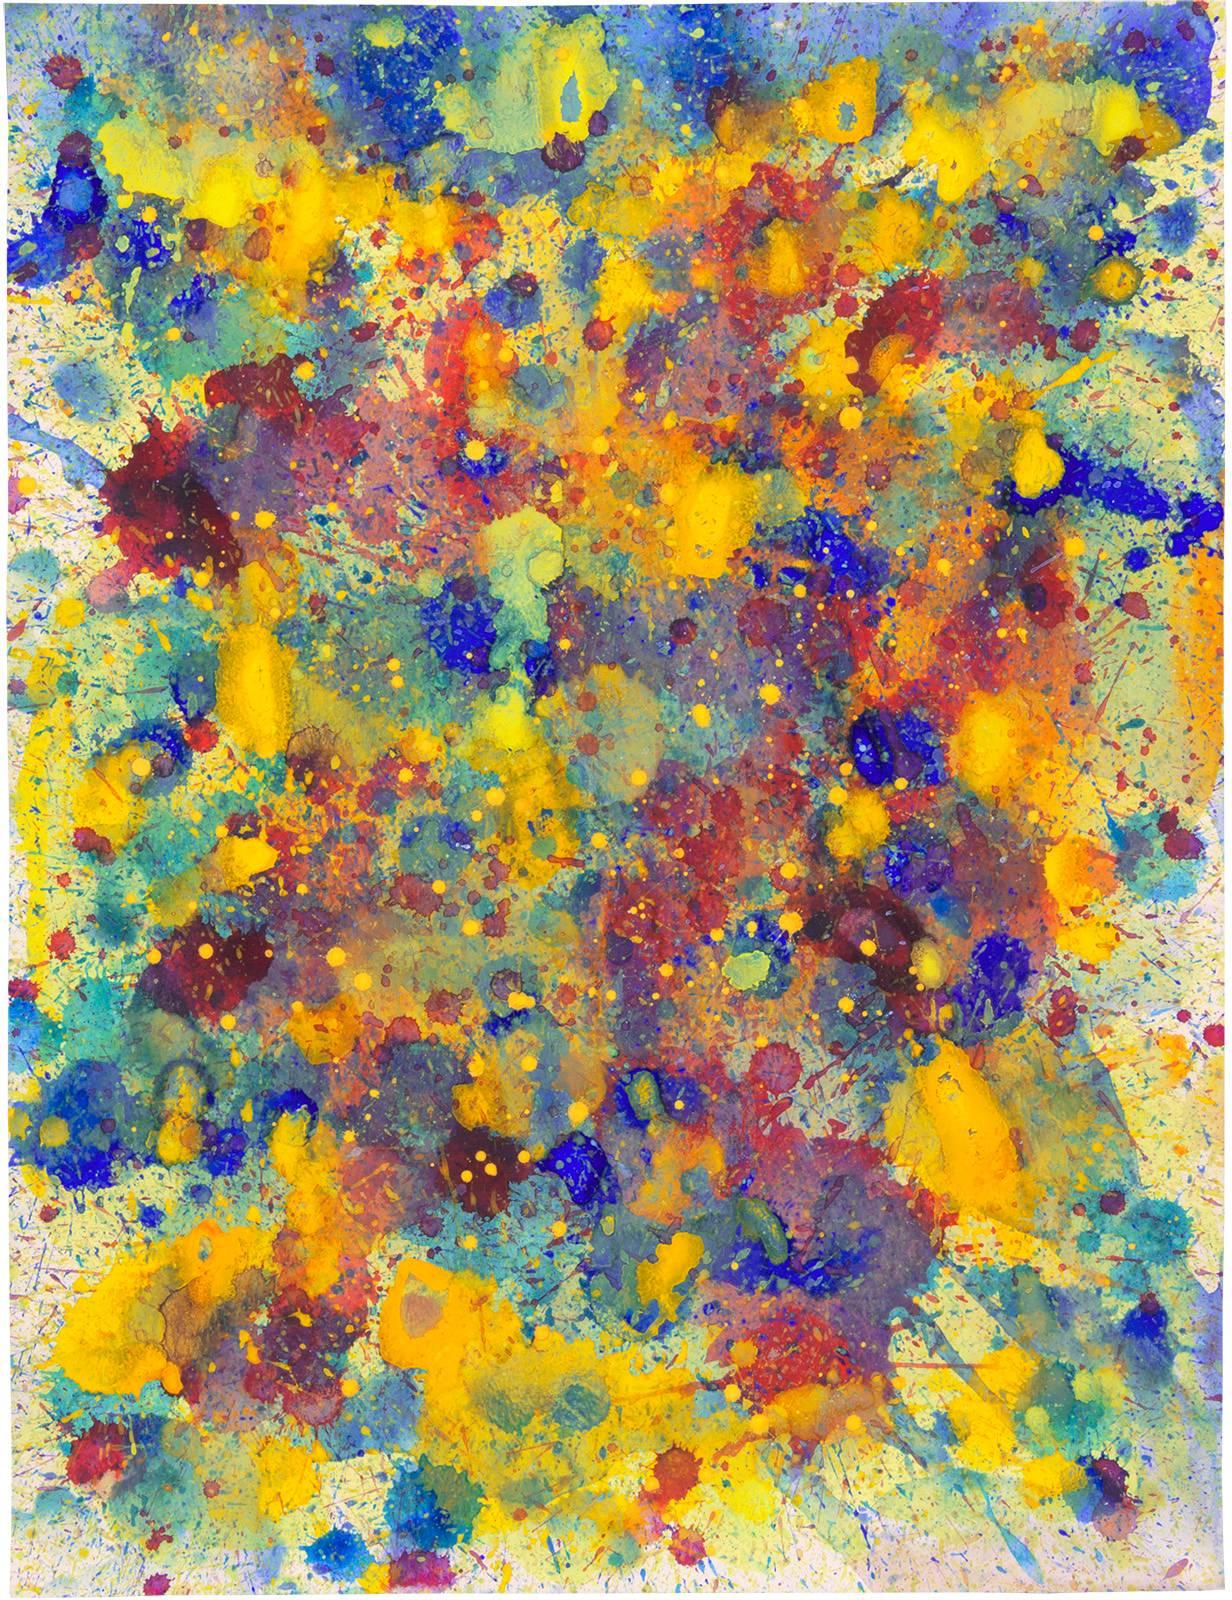 J. Steven Manolis Abstract Painting - Spring Flowers (Blue, Yellow, Red Abstract Expressionist Watercolor)